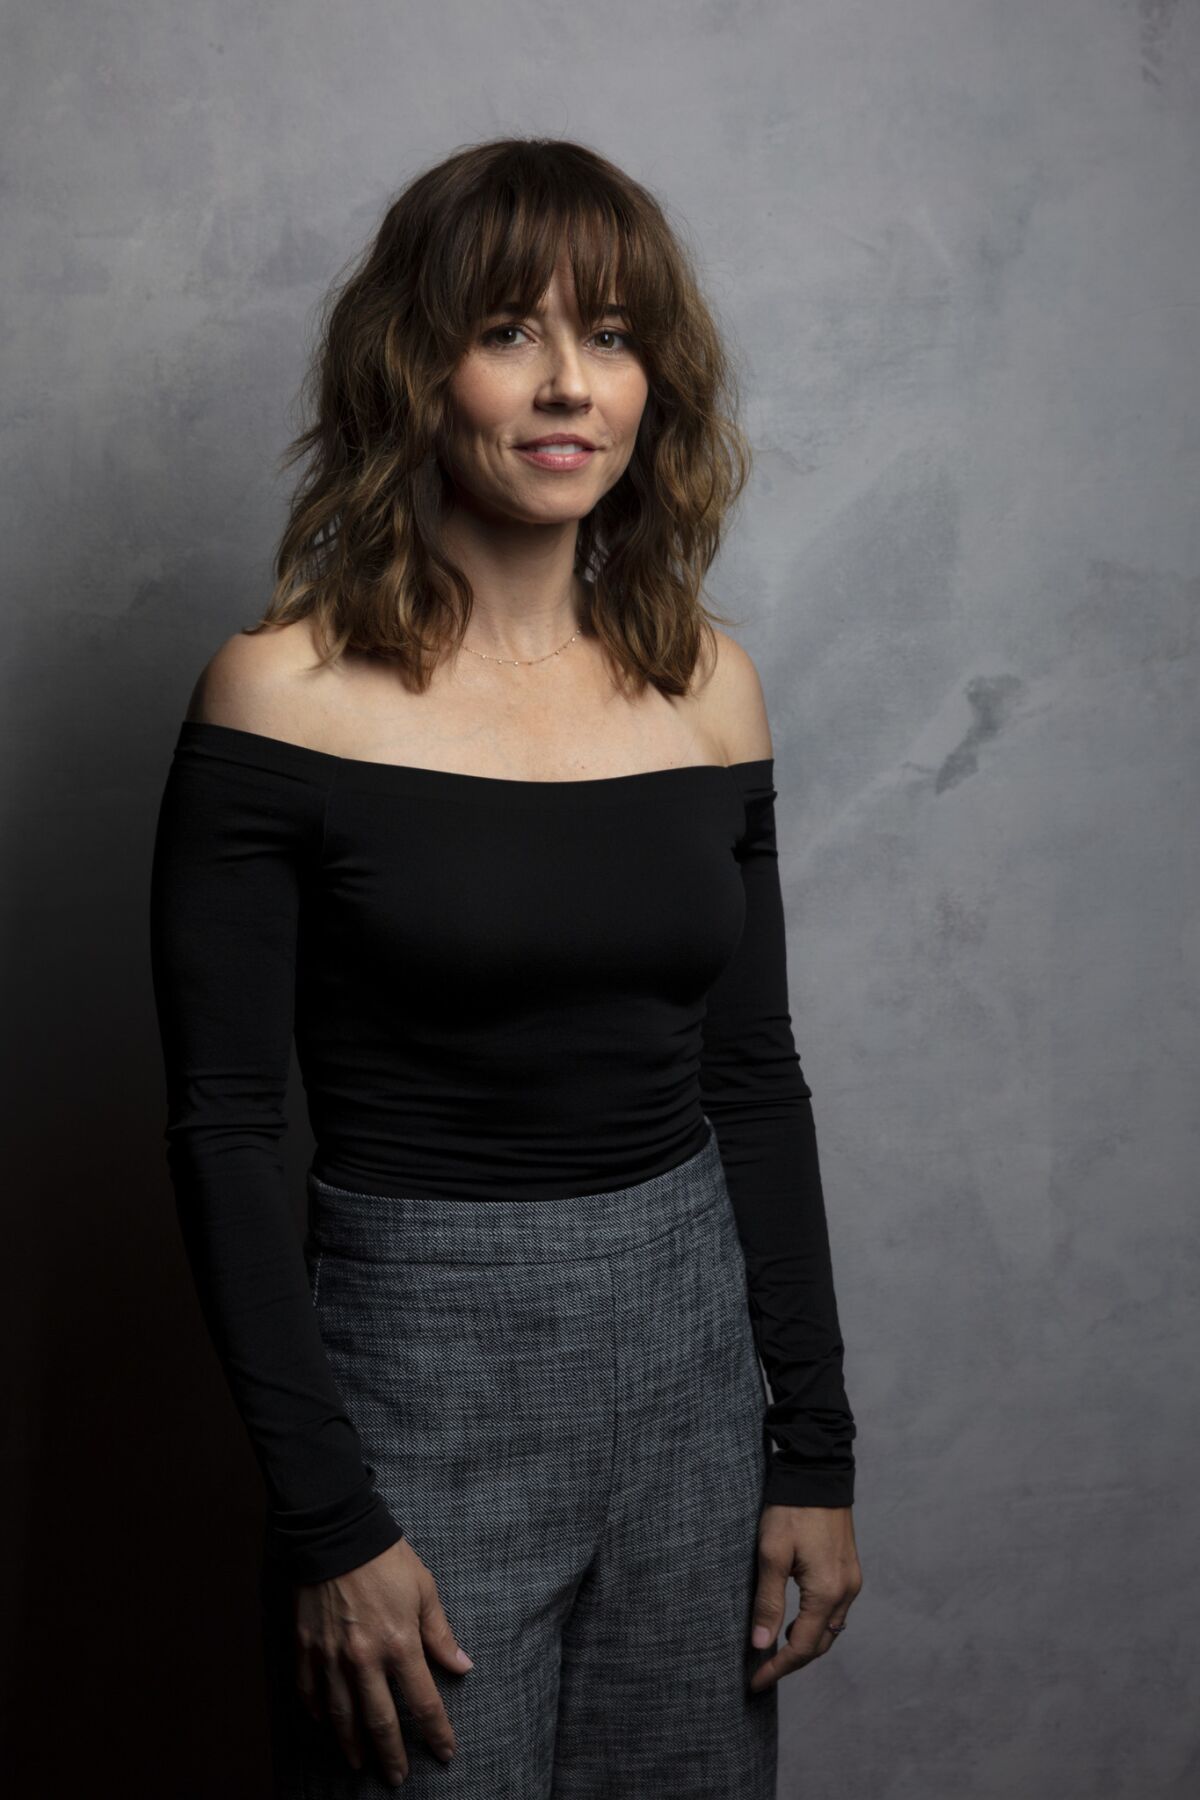 Actress Linda Cardellini from the film "Green Book."